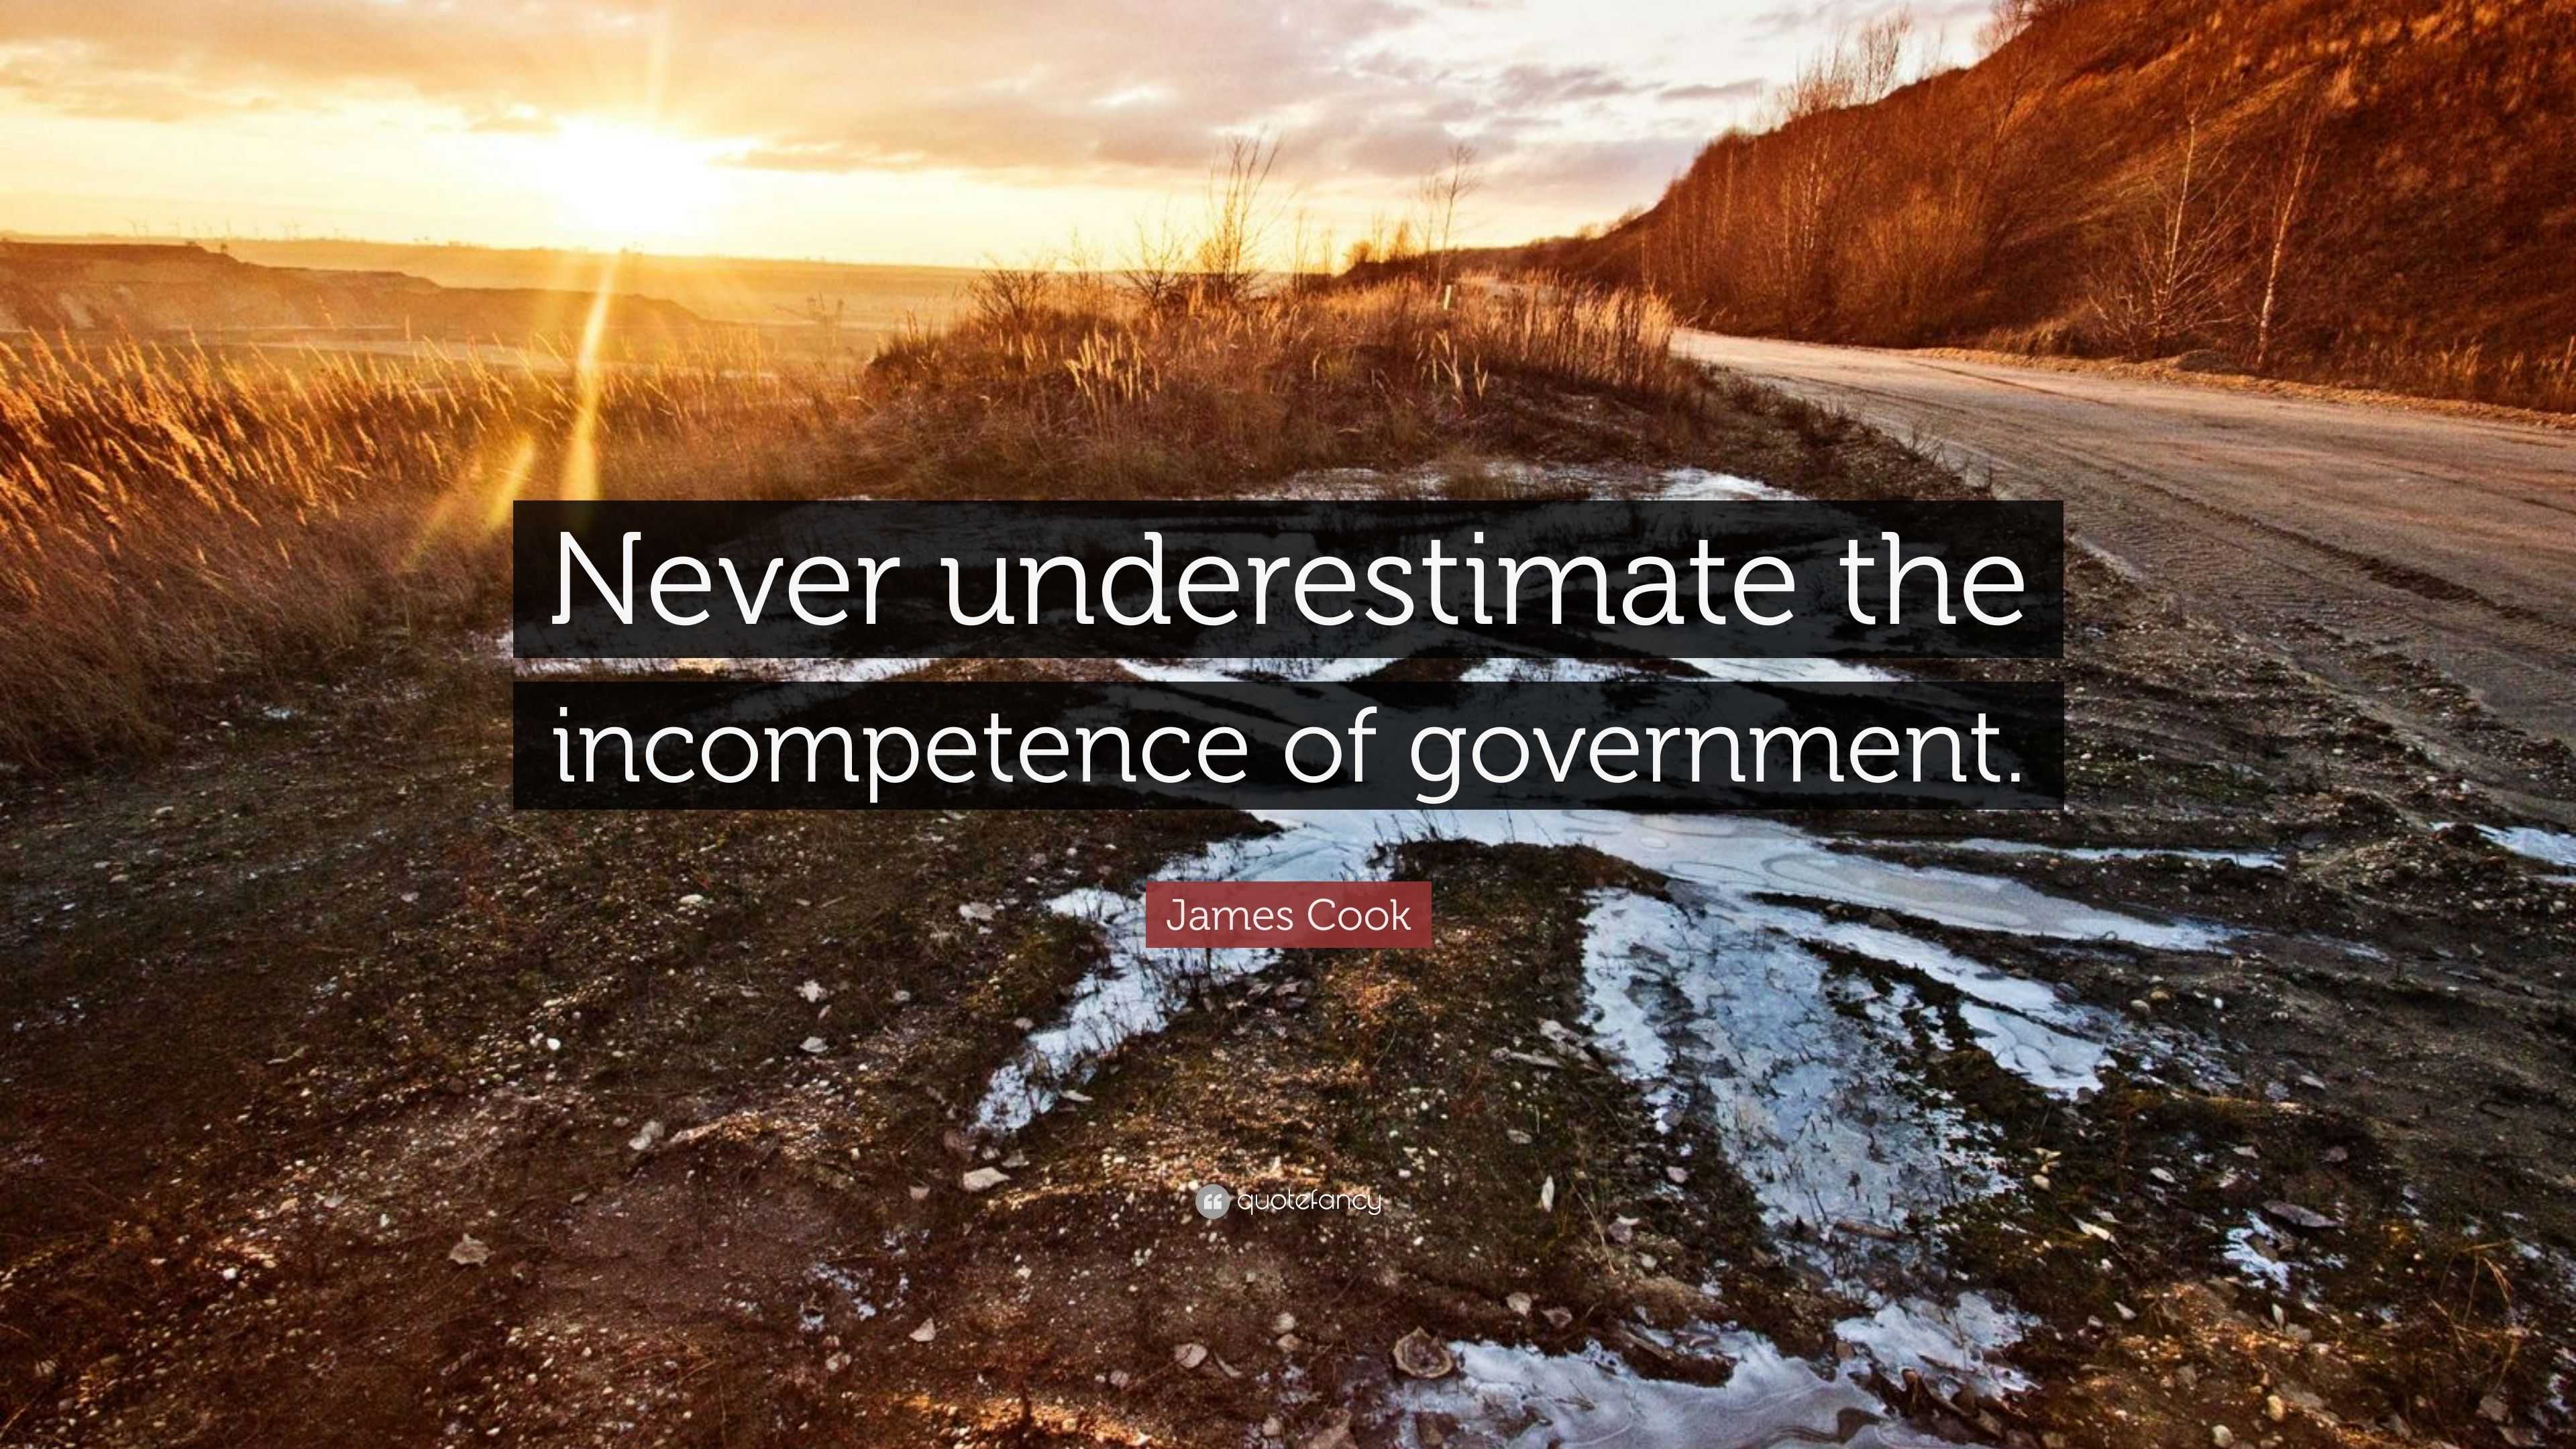 James Cook Quote: “Never underestimate the incompetence of